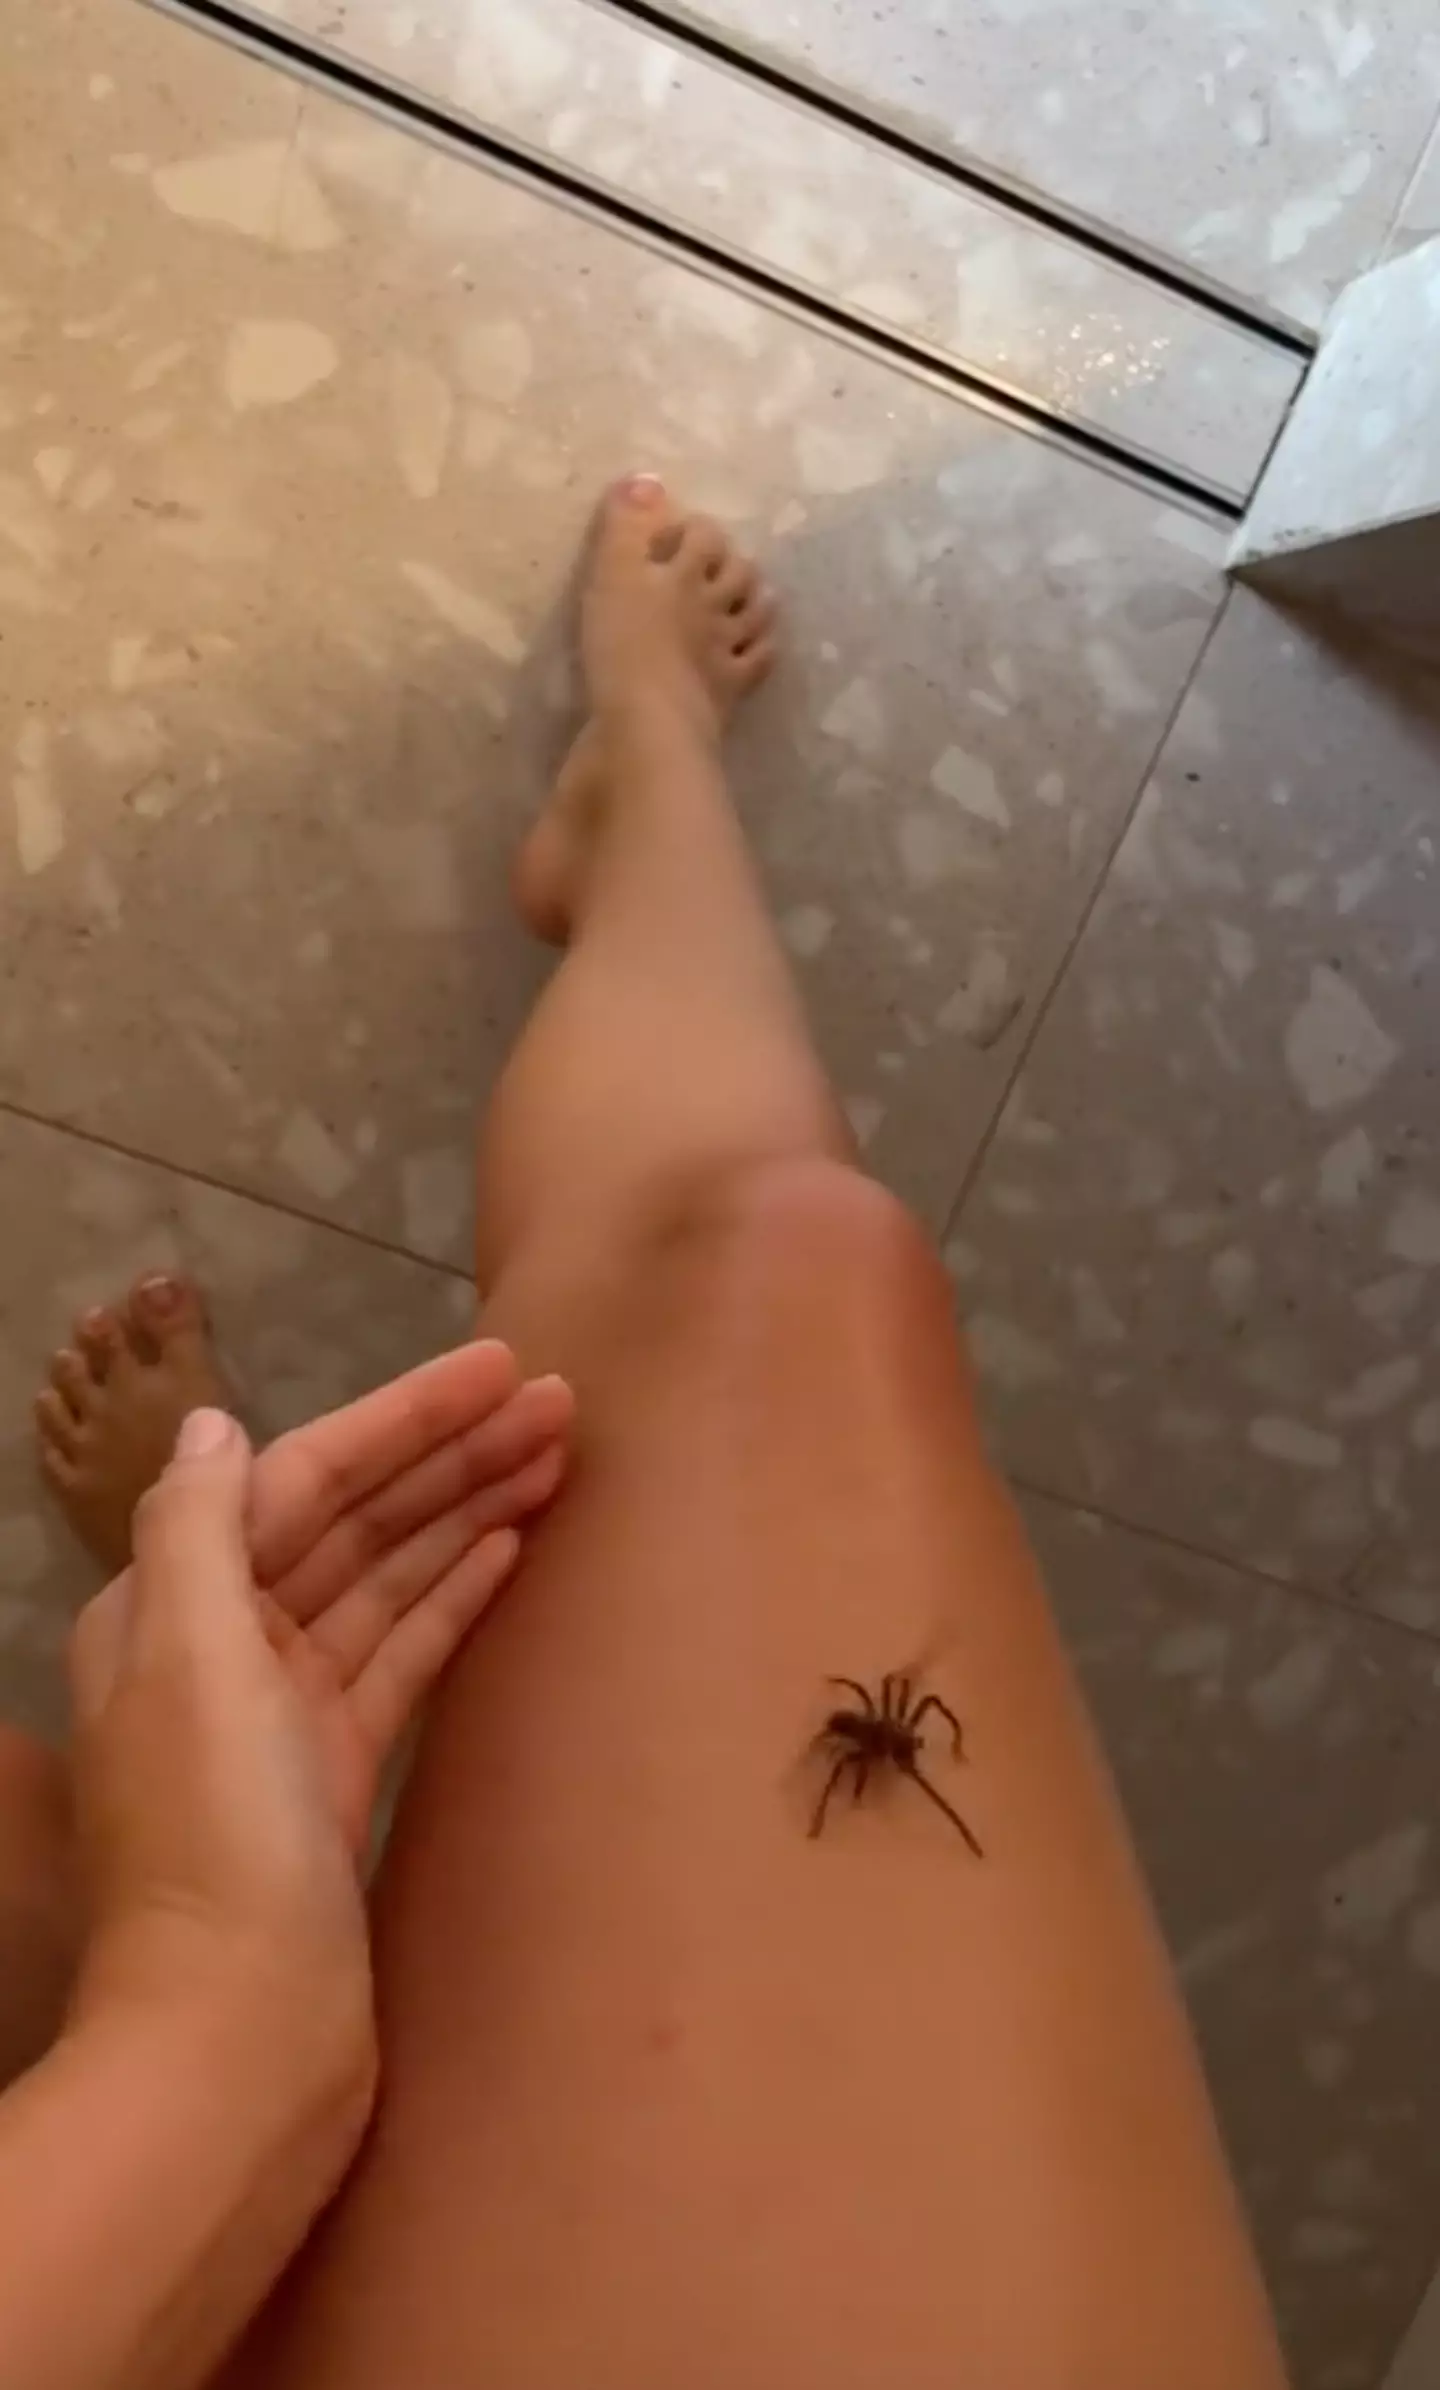 When Anna tried to save the huntsman spider, it starting crawling up her leg.